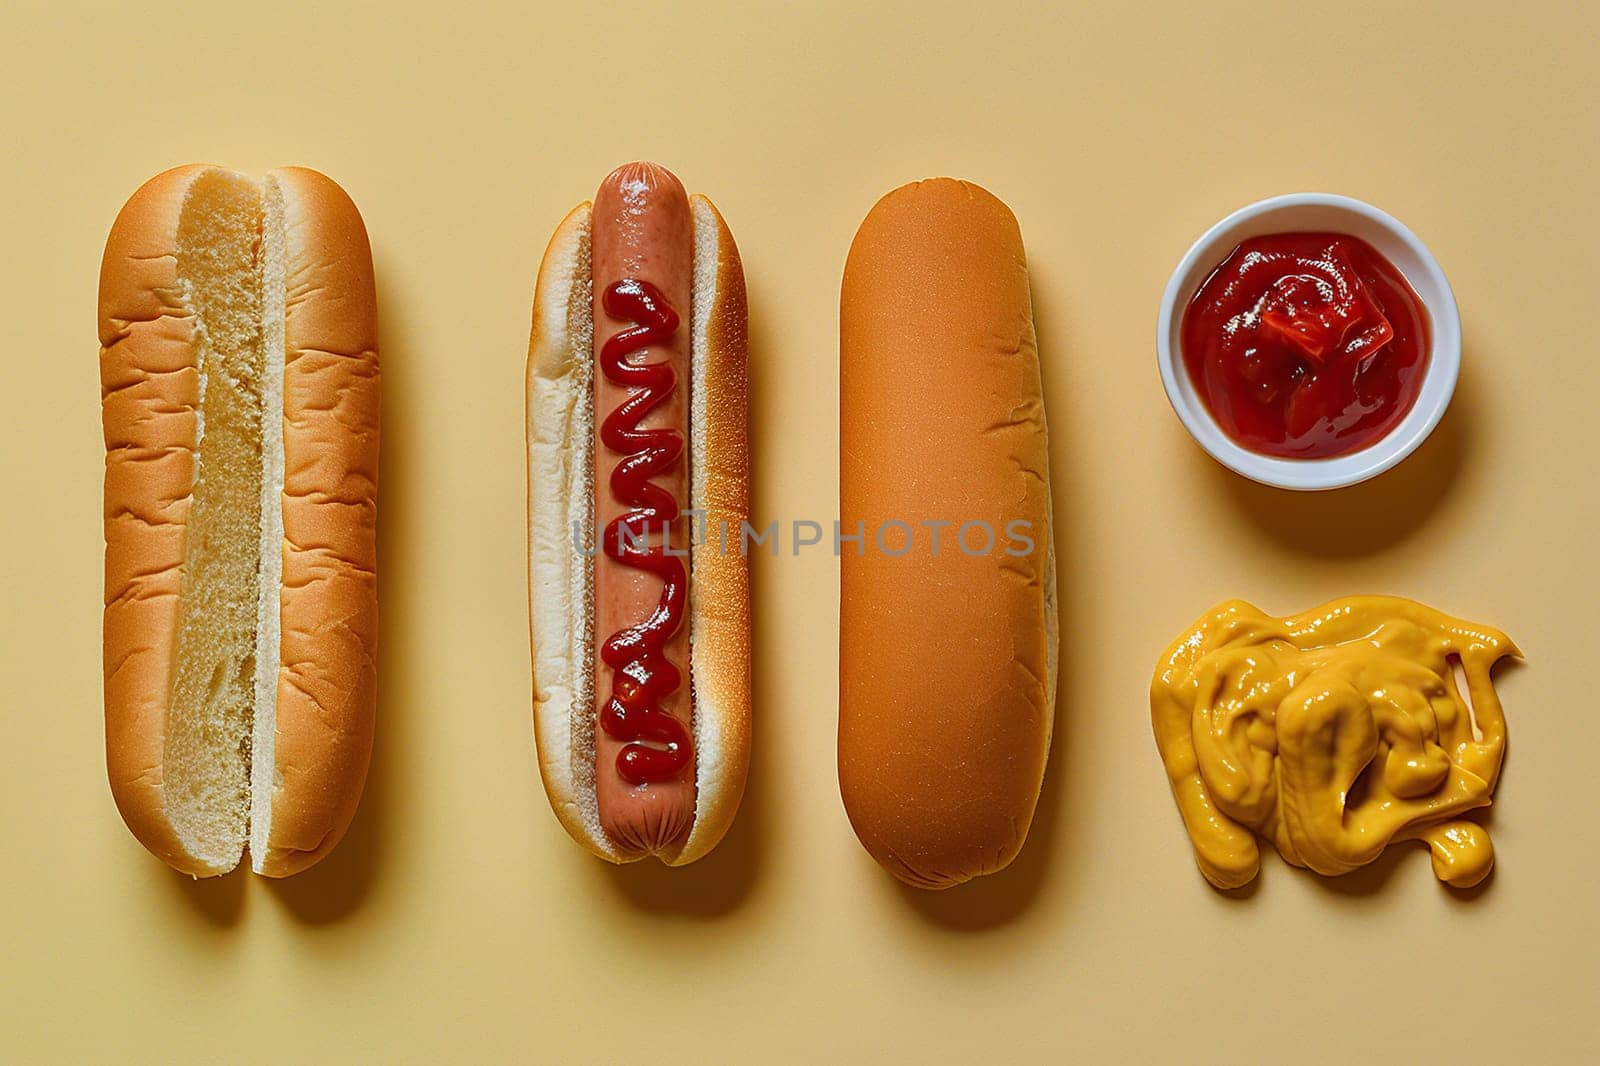 Ingredients for a hot dog. Bun, sausage, mustard and ketchup on a white background. Fast food concept.